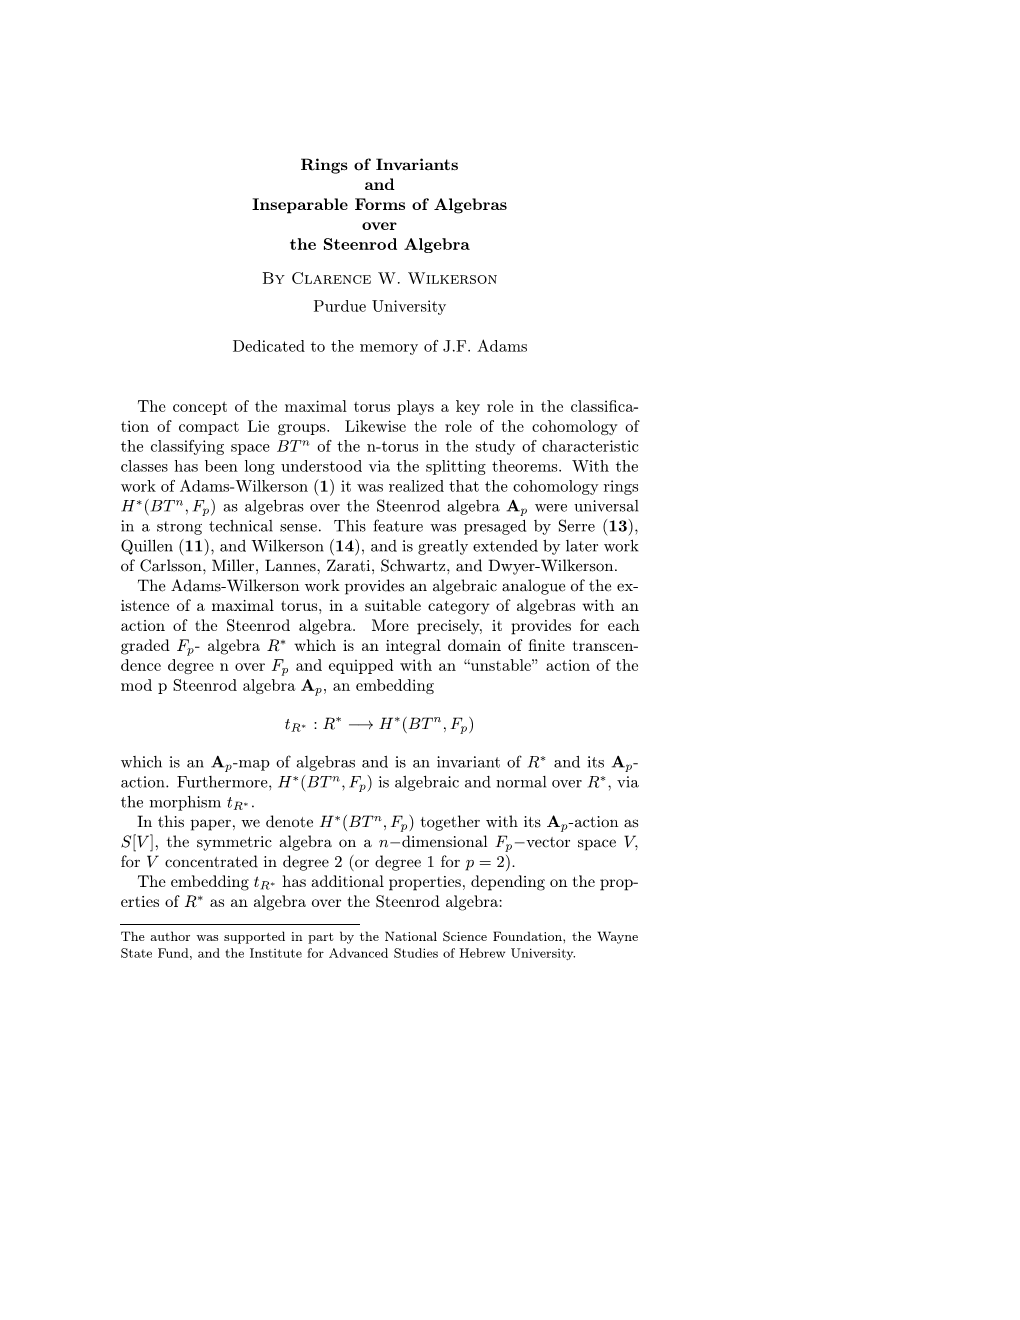 Rings of Invariants and Inseparable Forms of Algebras Over the Steenrod Algebra by Clarence W